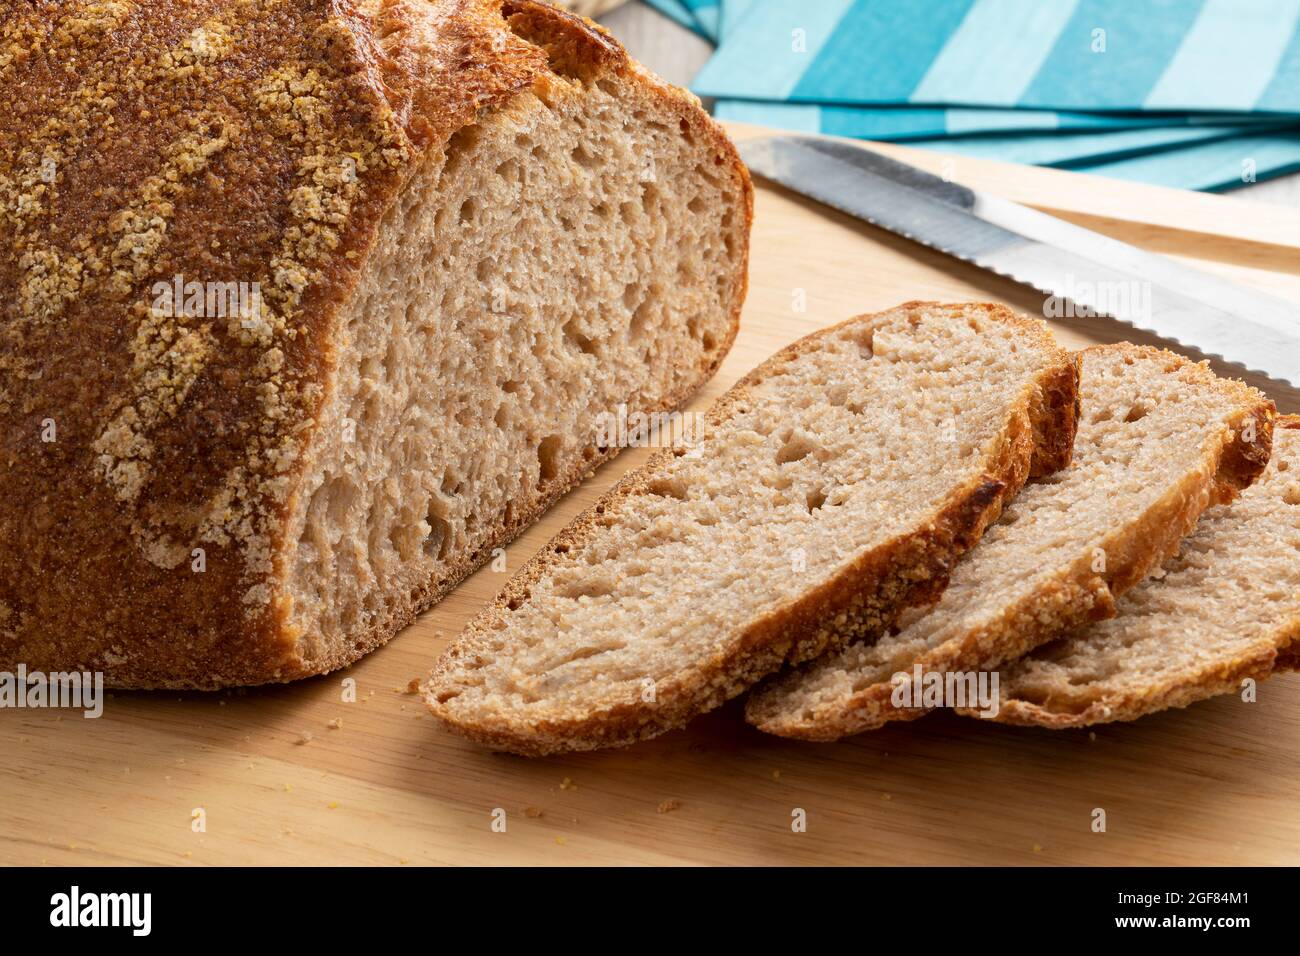 Sliced whole fresh baked German dinkel wheat bread on a cutting board close up Stock Photo